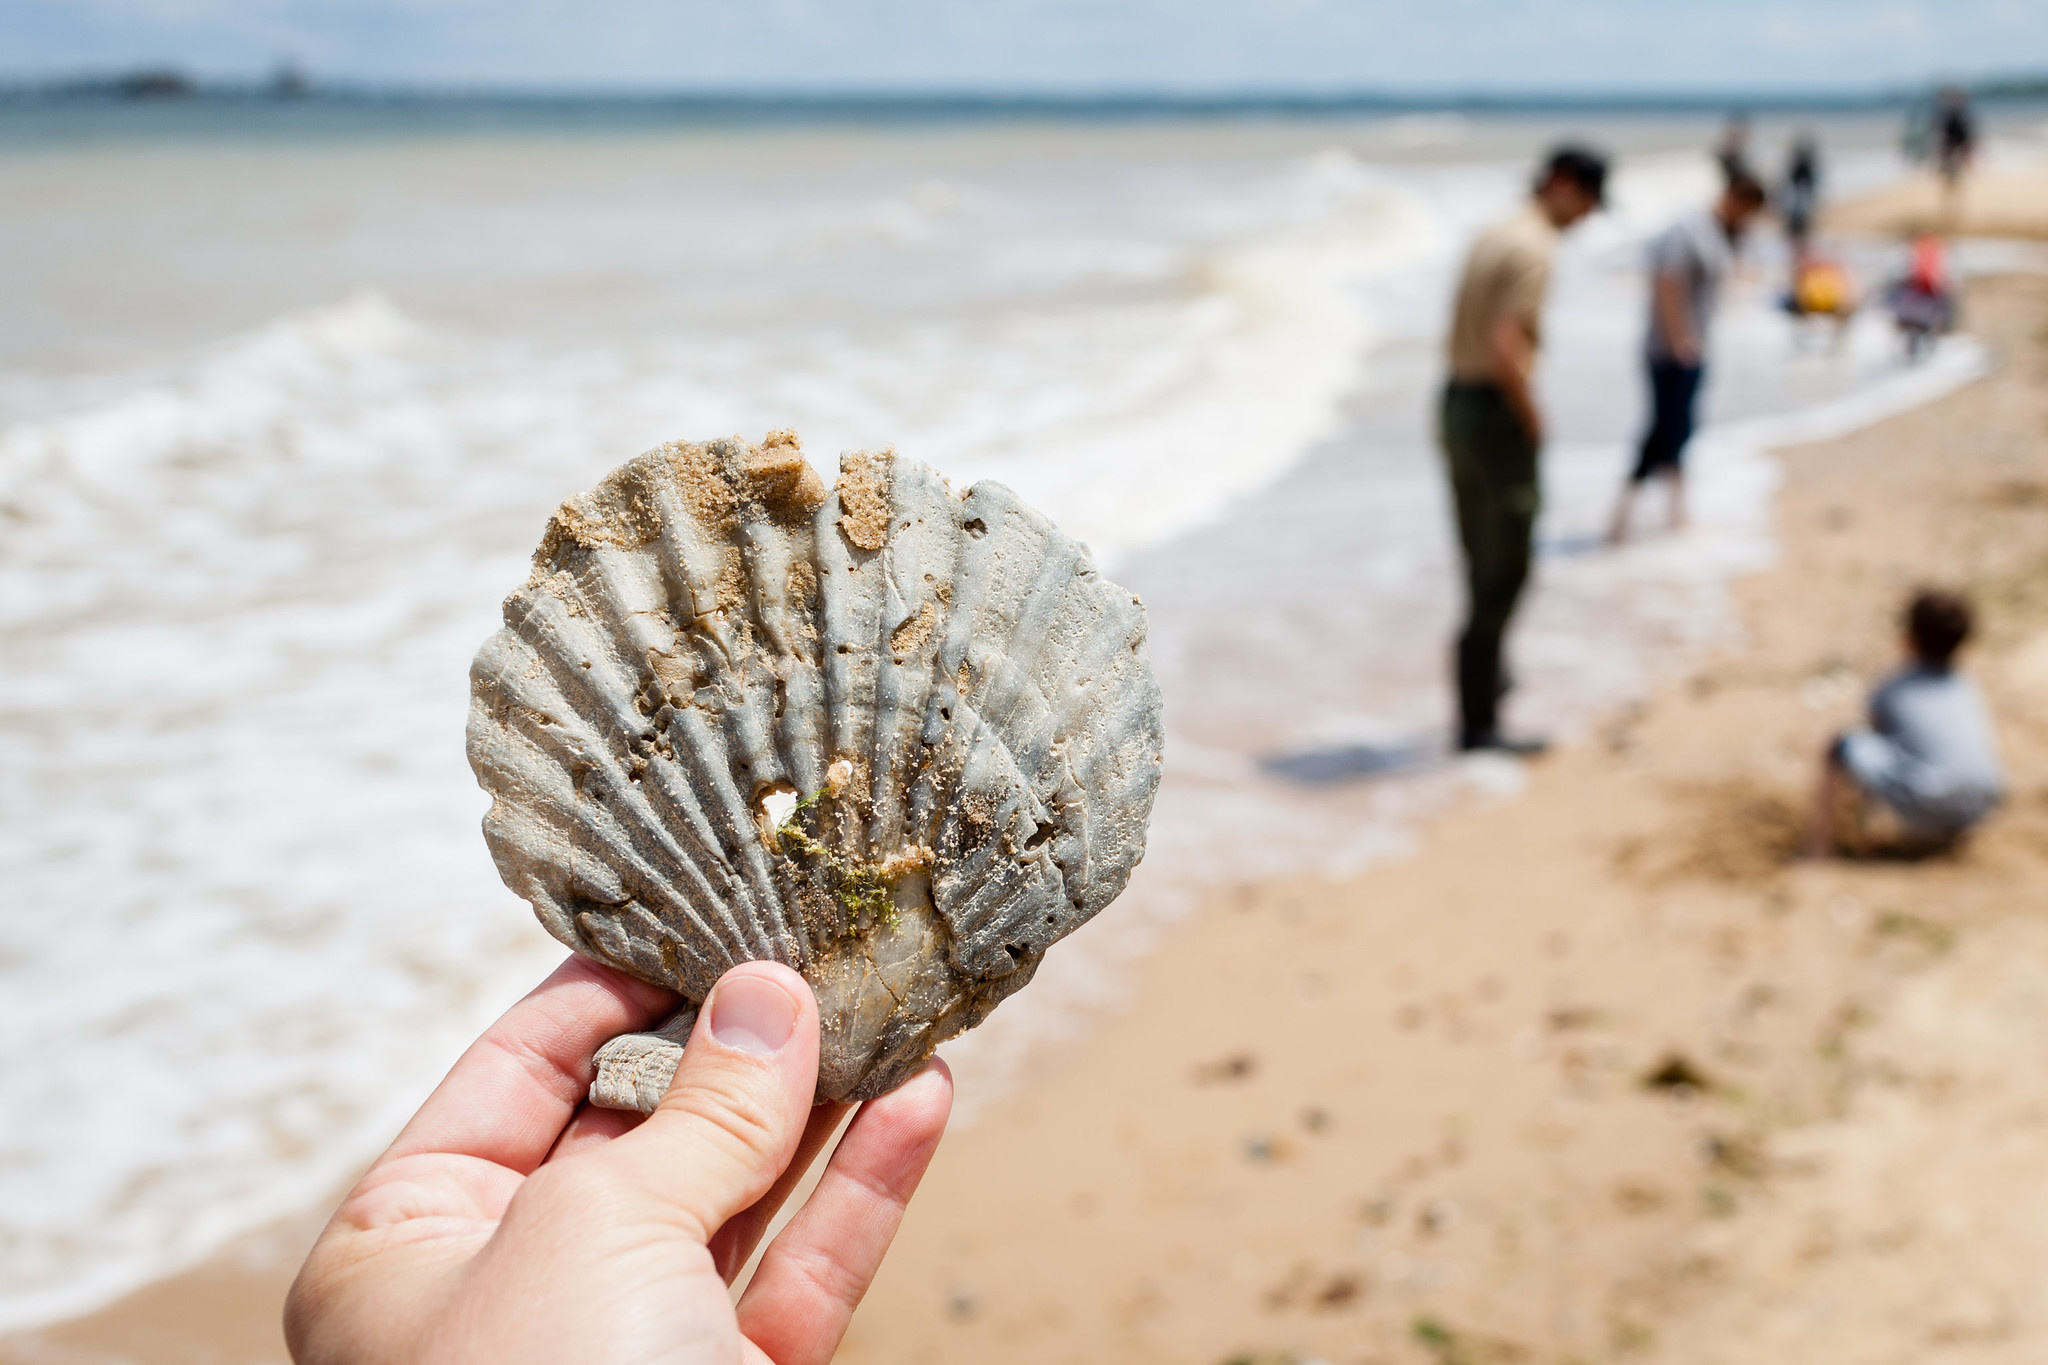 Photo of a person's hand holding a fossil scallop shell on a beach